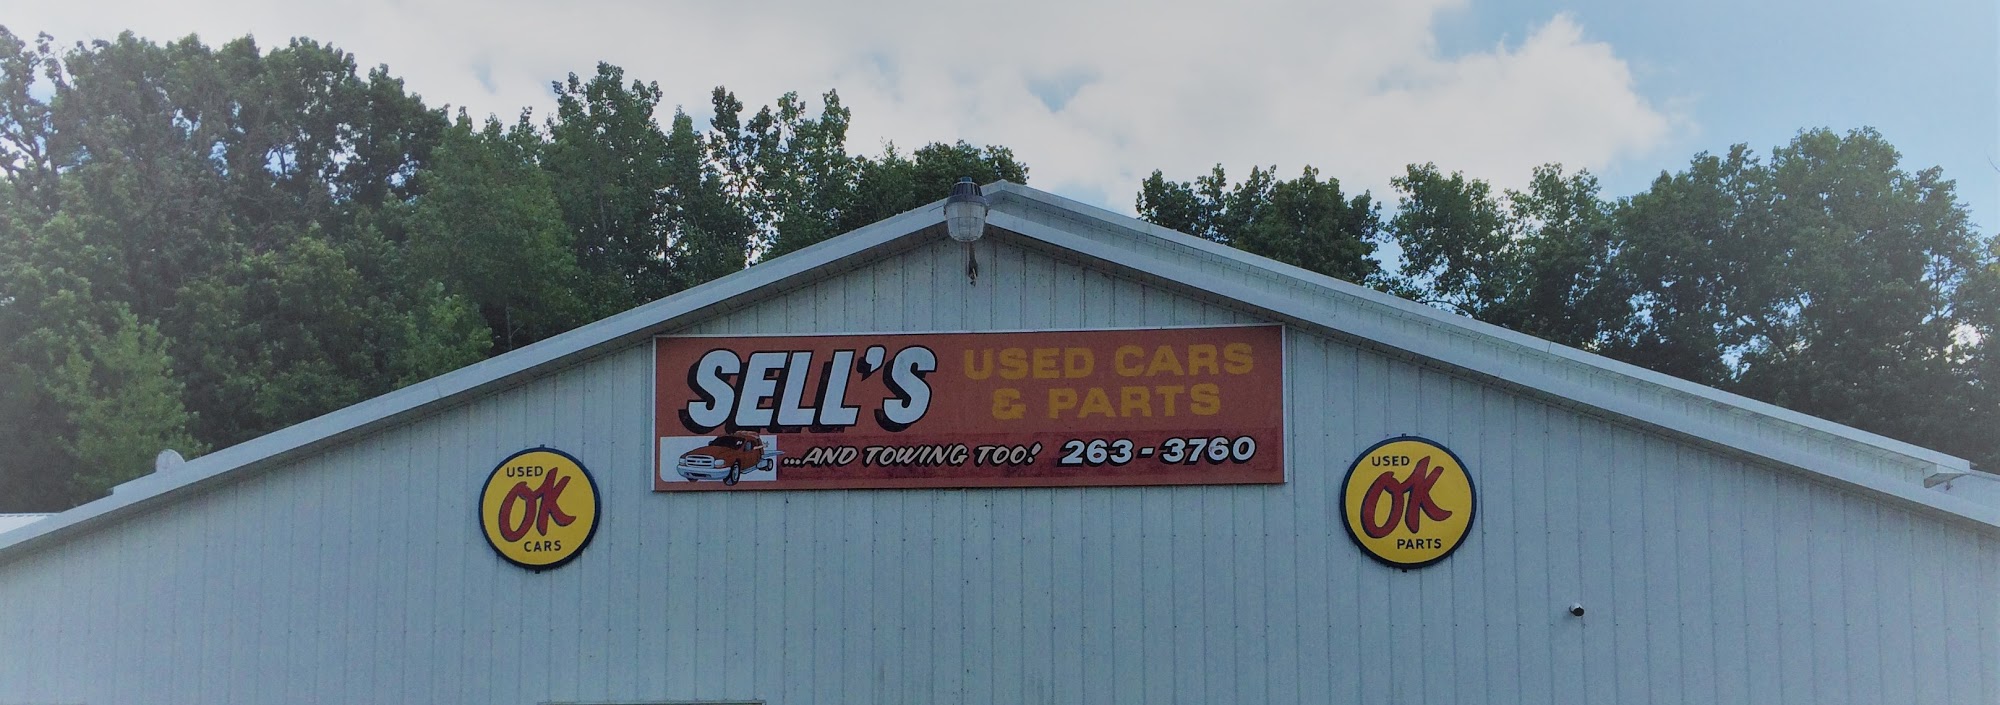 Sells Used Parts & Towing